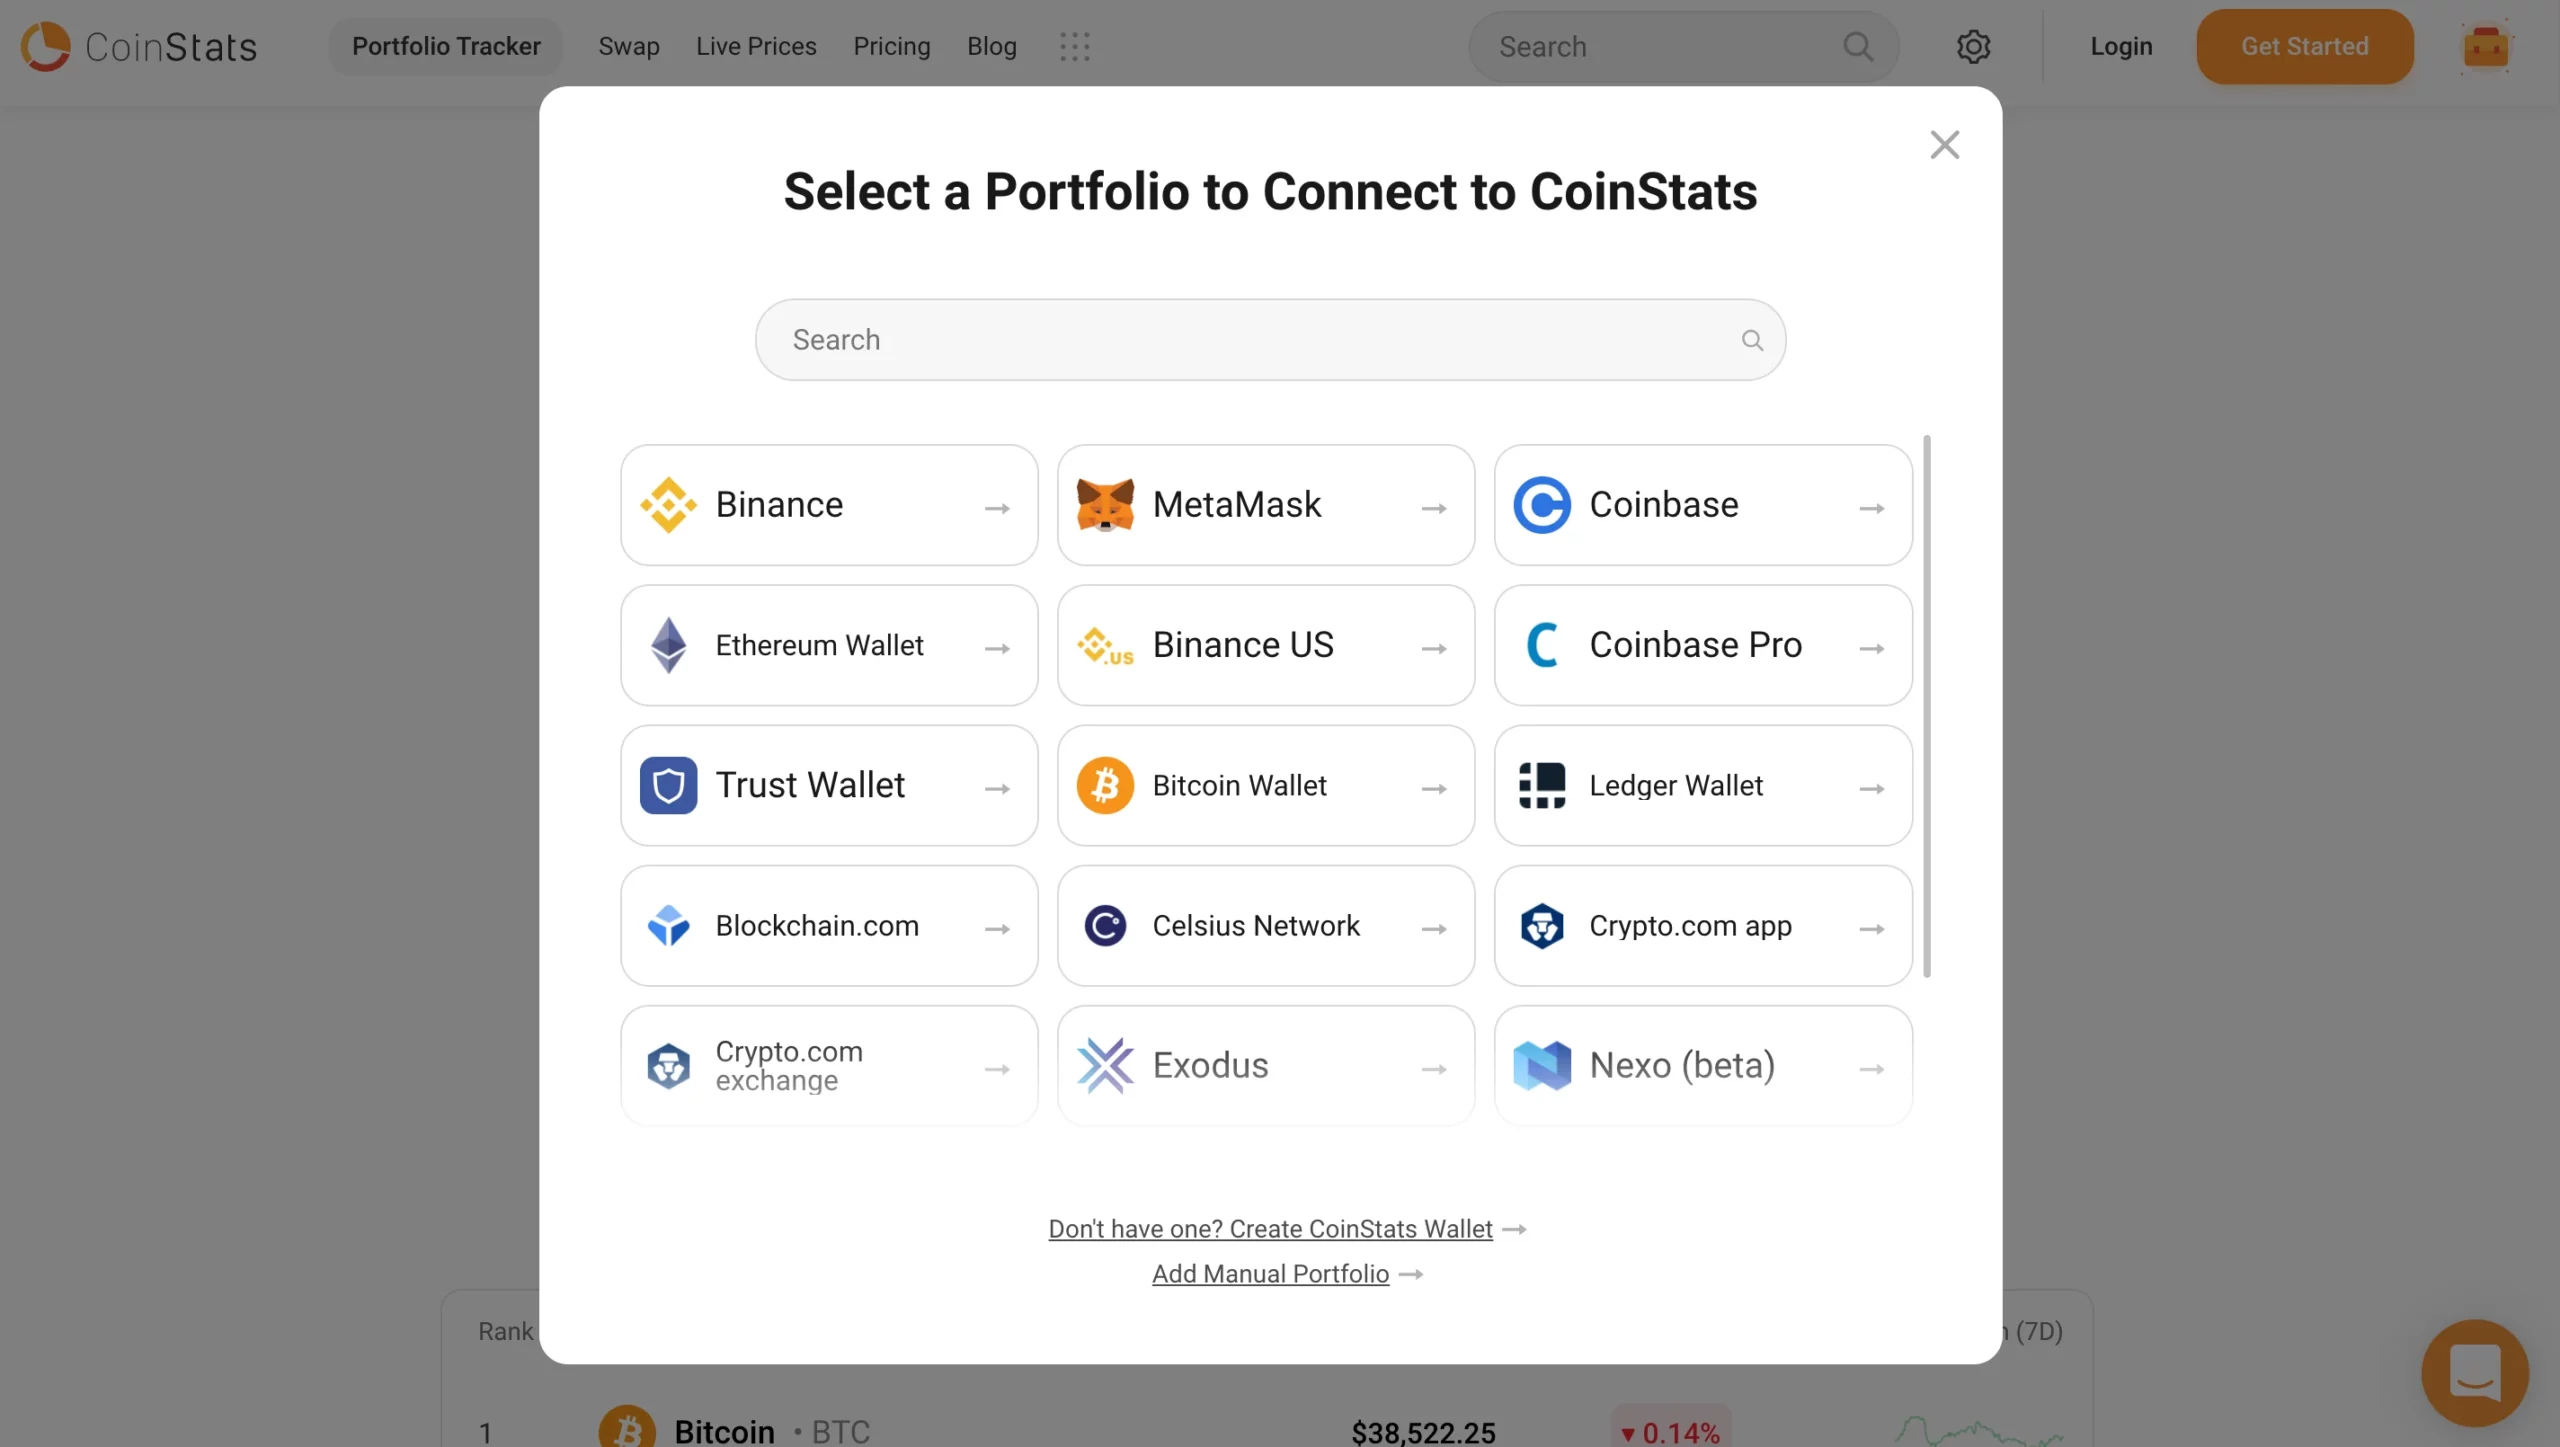 Select and connect your portfolio